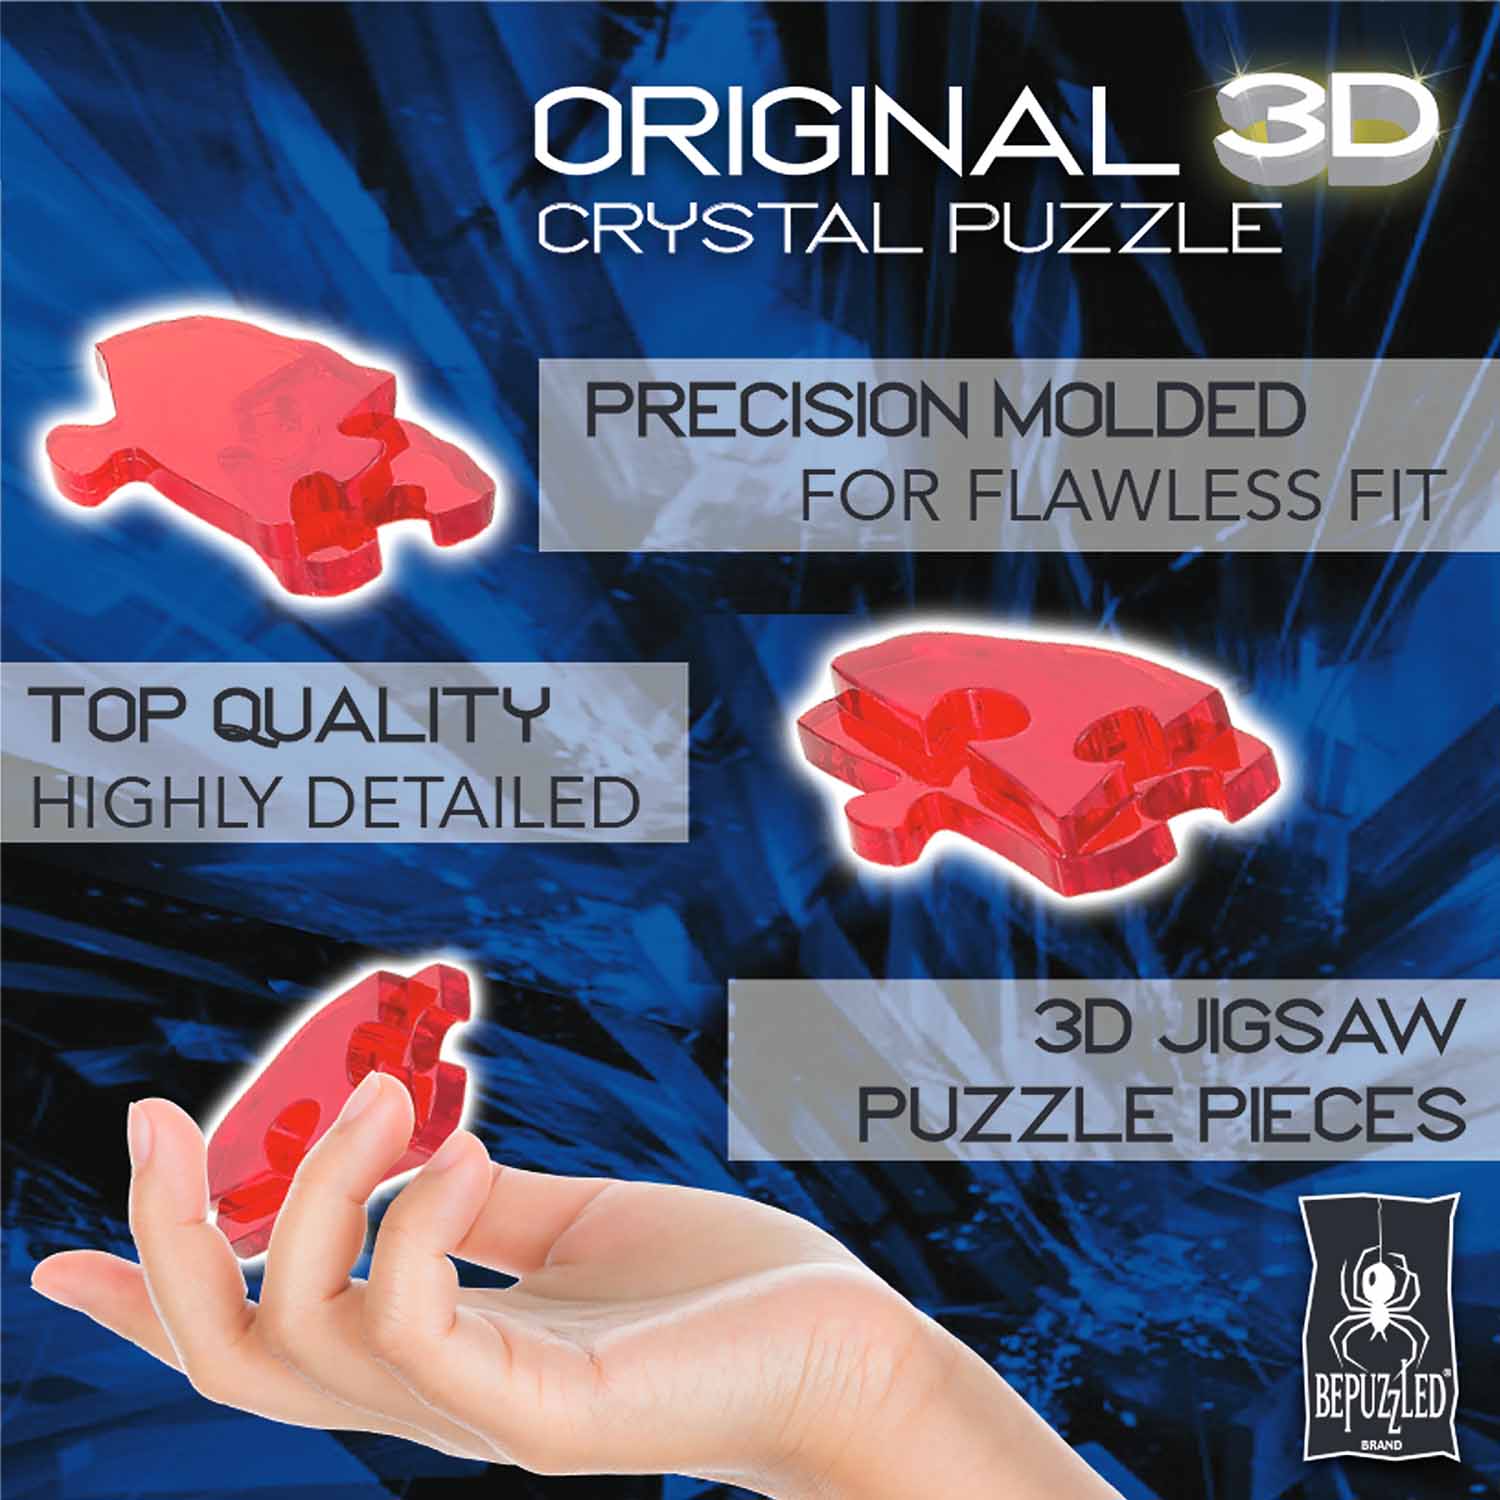 Dog and Puppy 3D Crystal Puzzle